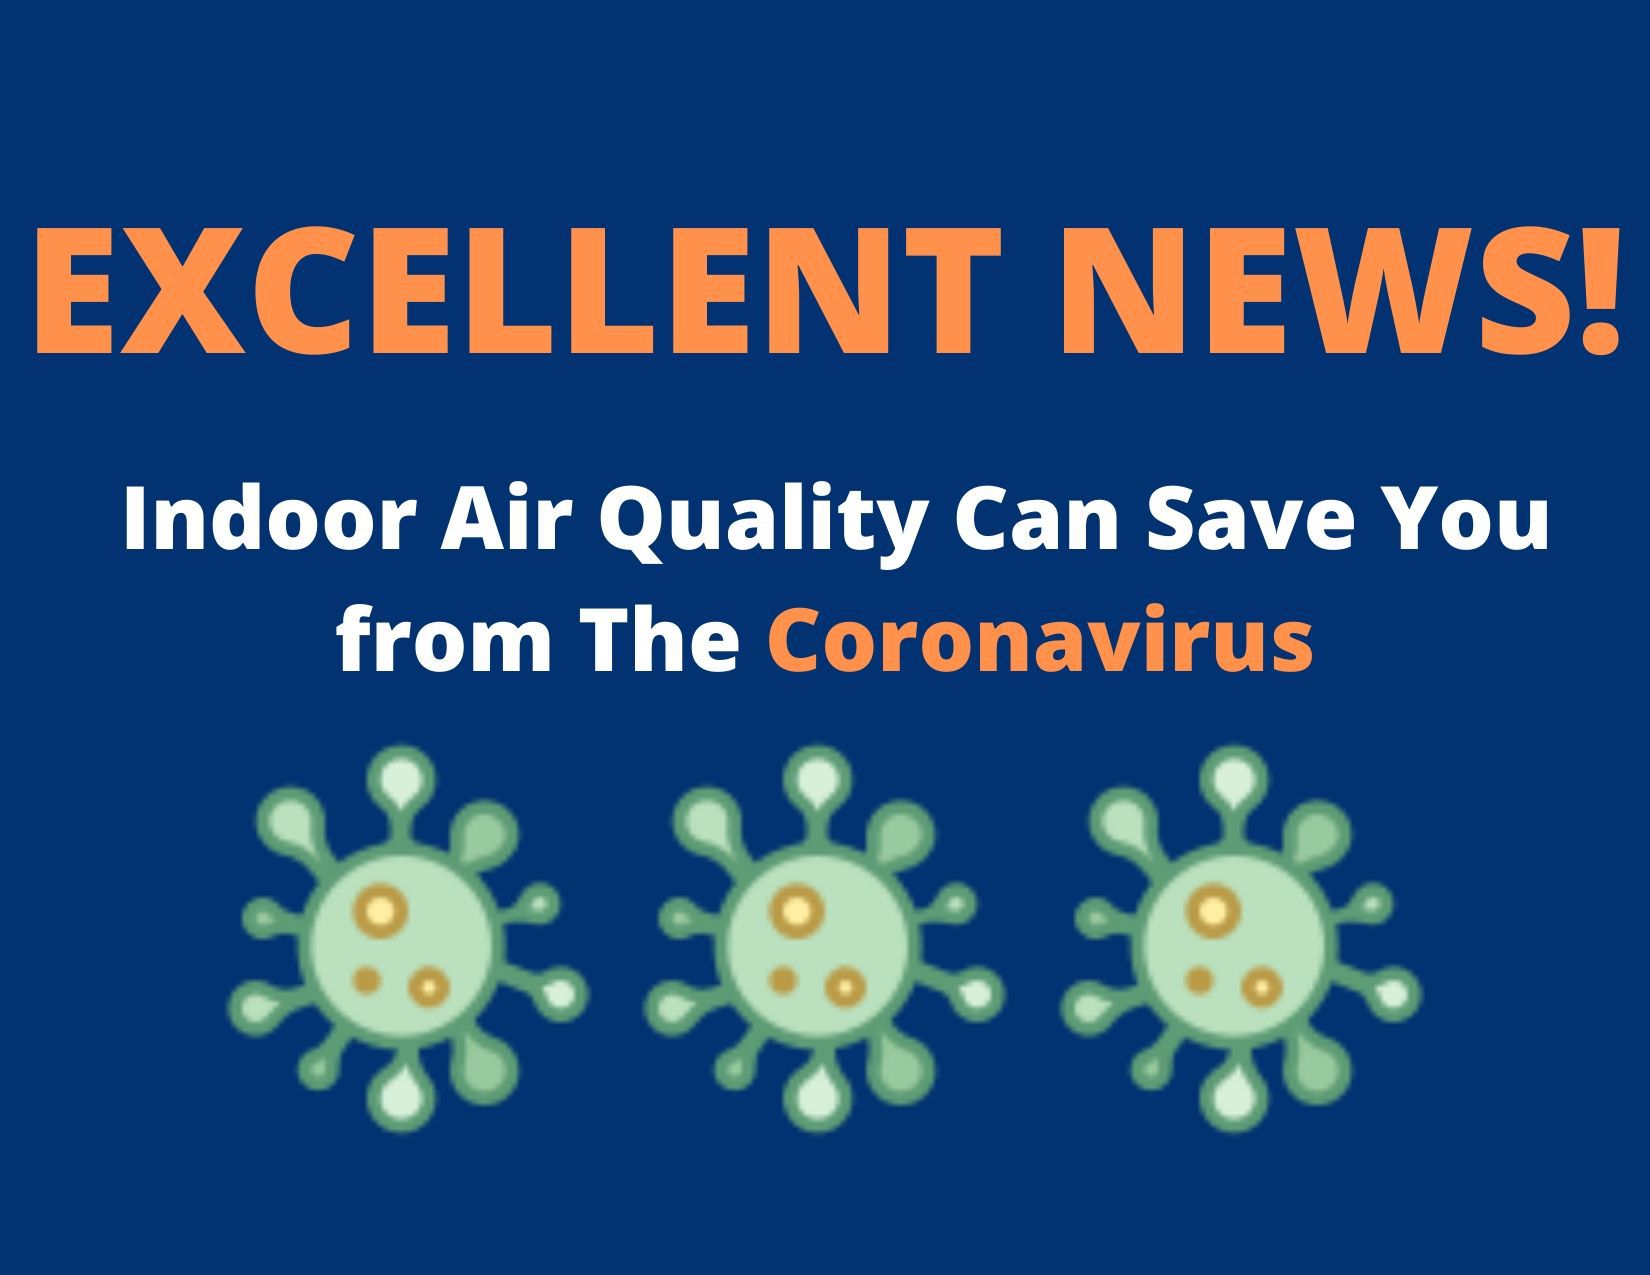 How Indoor Air Quality Can Save You from The Coronavirus